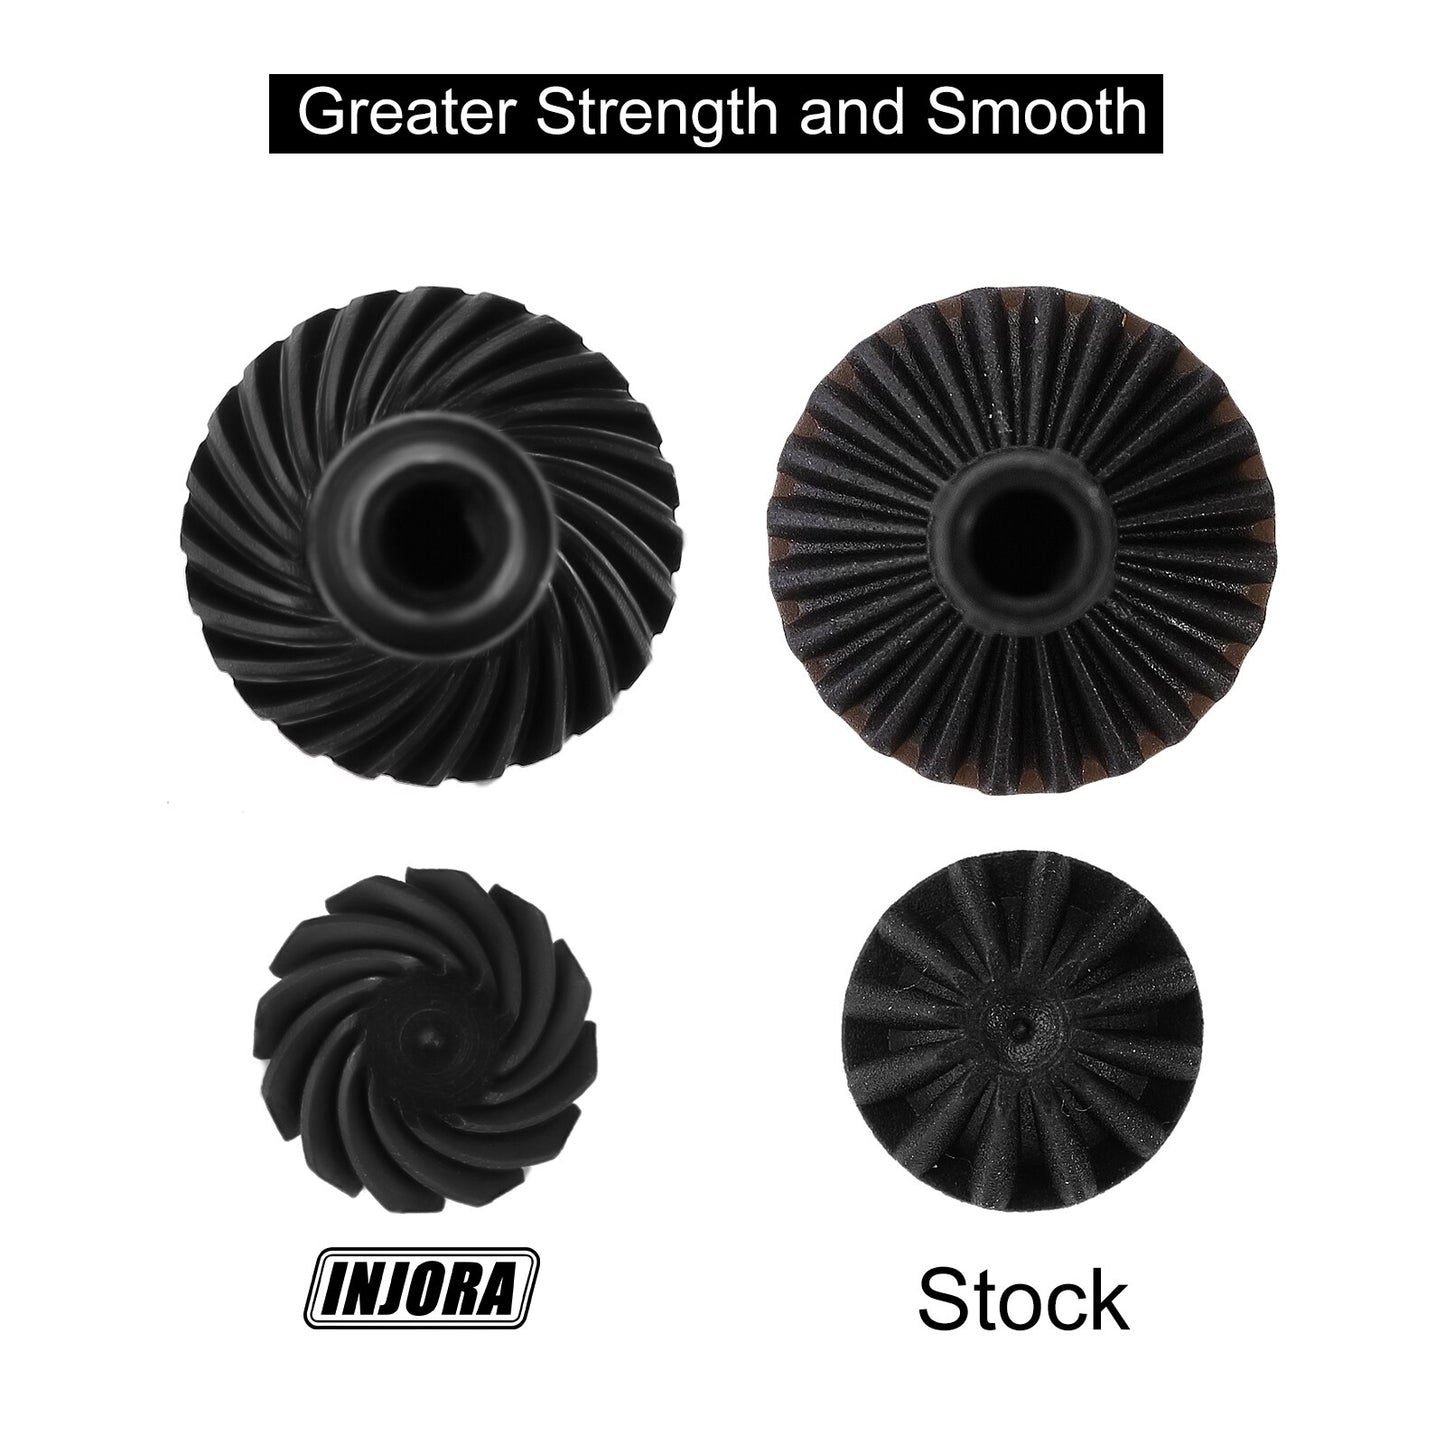 INJORA Steel Alloy Overdrive Underdrive Helical Axle Gear Set for 1/18 RC Crawler Car TRX4M Upgrade (4M-10 4M-34)